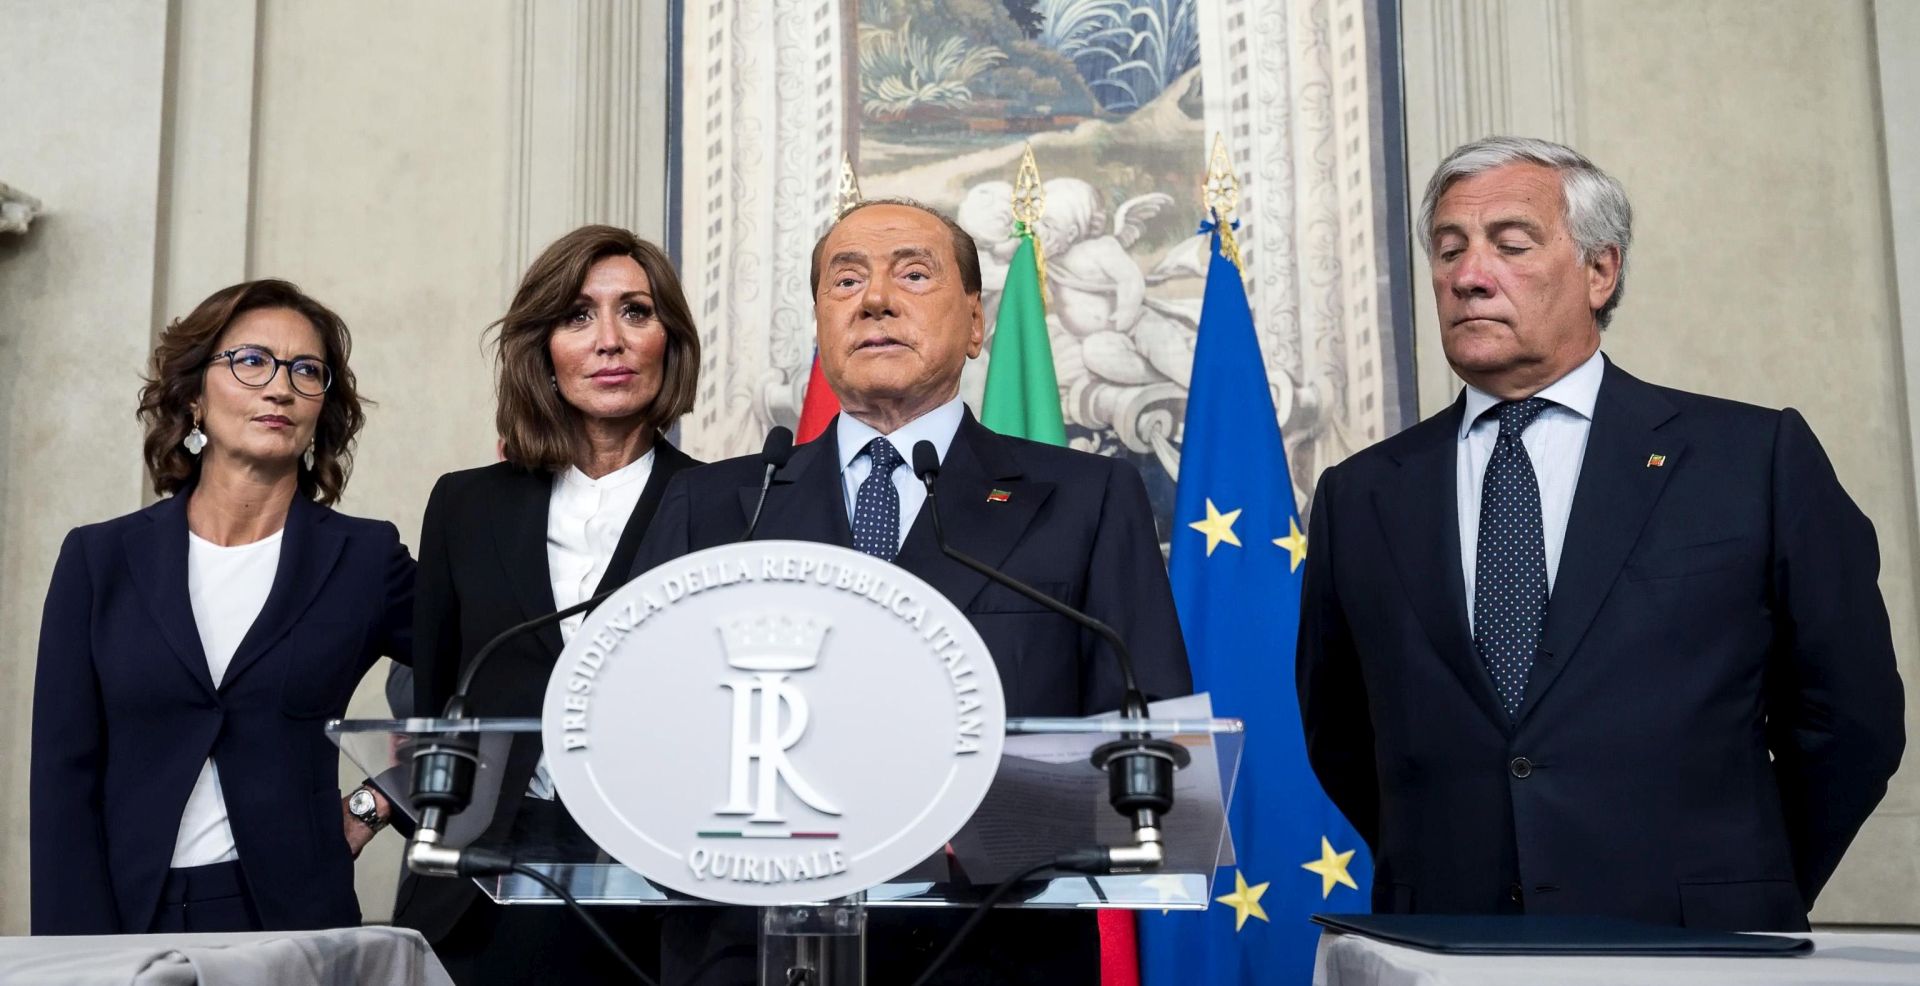 epa07785507 Former premier and leader of the Forza Italia (FI) party Silvio Berlusconi (C) addresses the media after a meeting with Italian President Sergio Mattarella at the Quirinale Palace for the second round of formal political consultations following the resignation of Prime Minister Giuseppe Conte, in Rome, Italy, 22 August 2019. In picture (L-R) are seen Mariastella Gelmini, Anna Maria Bernini and Antonio Tajani. 'The experience just concluded shows that government projects are done with the times and with compatible ideas, not after the vote but before. So a government can't be born in the lab, if it's based only on a contract,' Berlusconi said.  EPA/ANGELO CARCONI